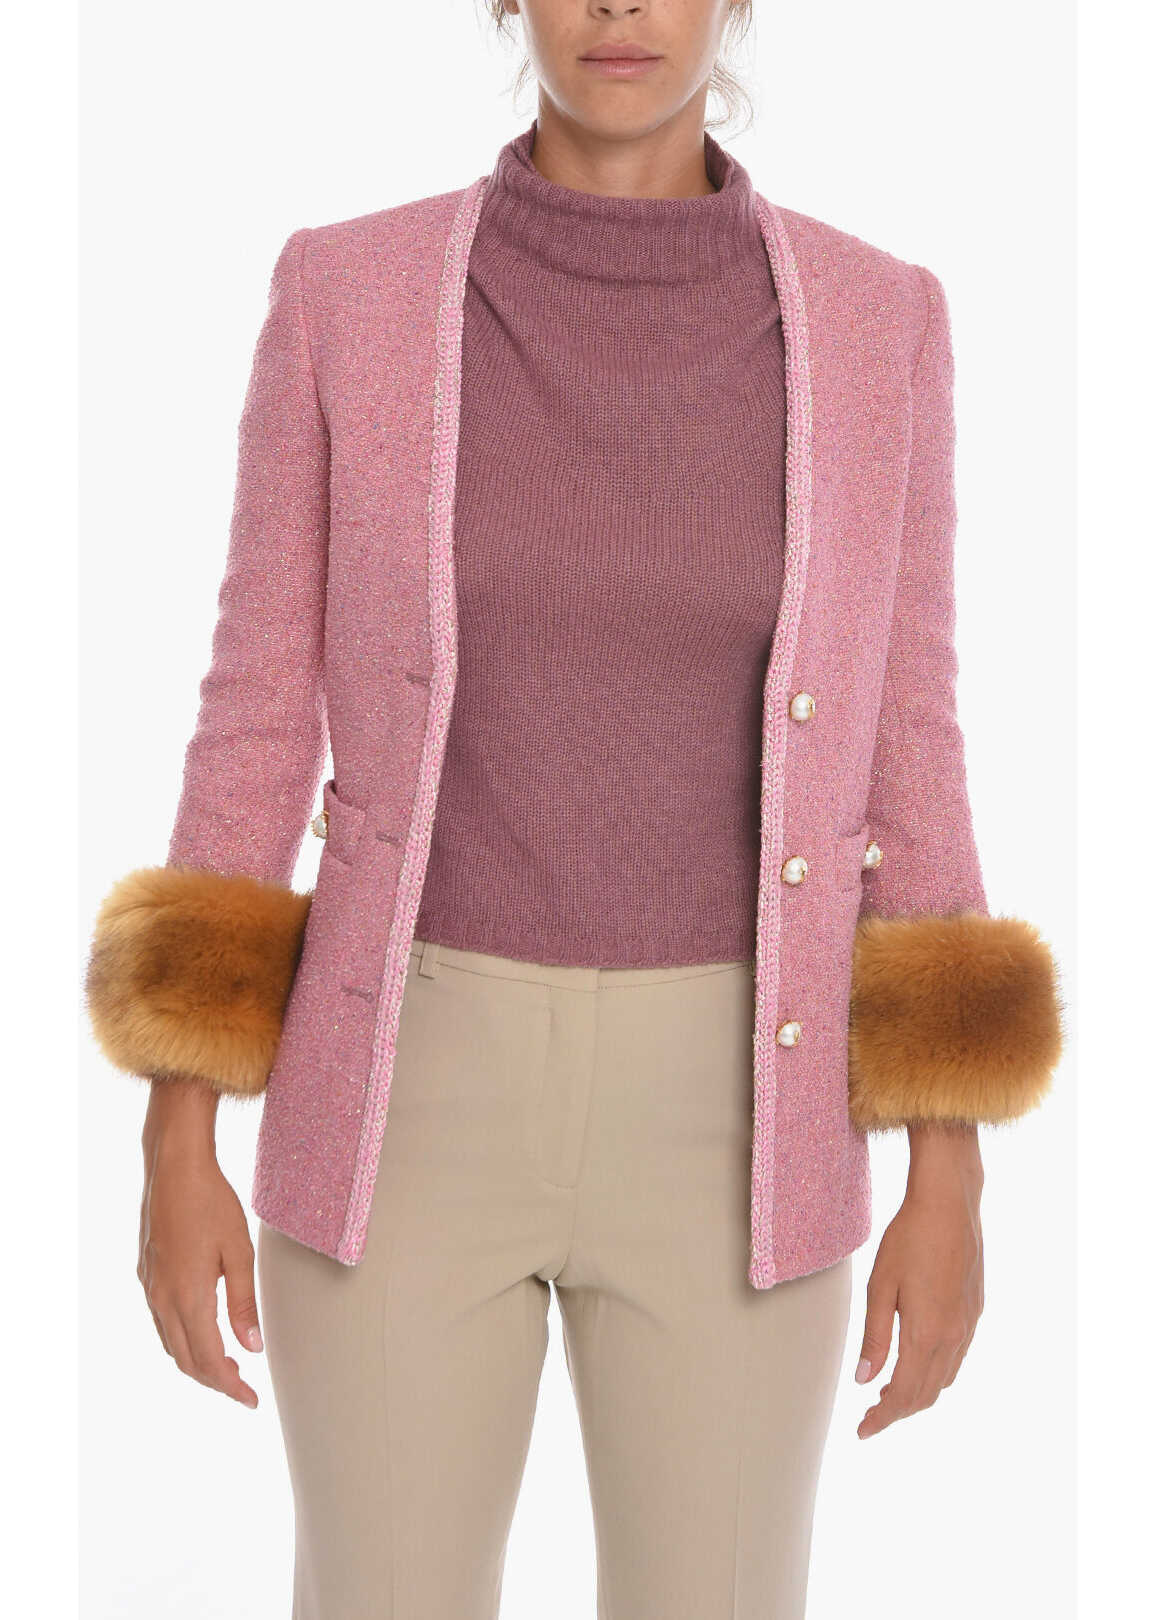 Saint Laurent Wool-Tweed Single-Breasted Blazer With Faux-Furred Cuffs Pink